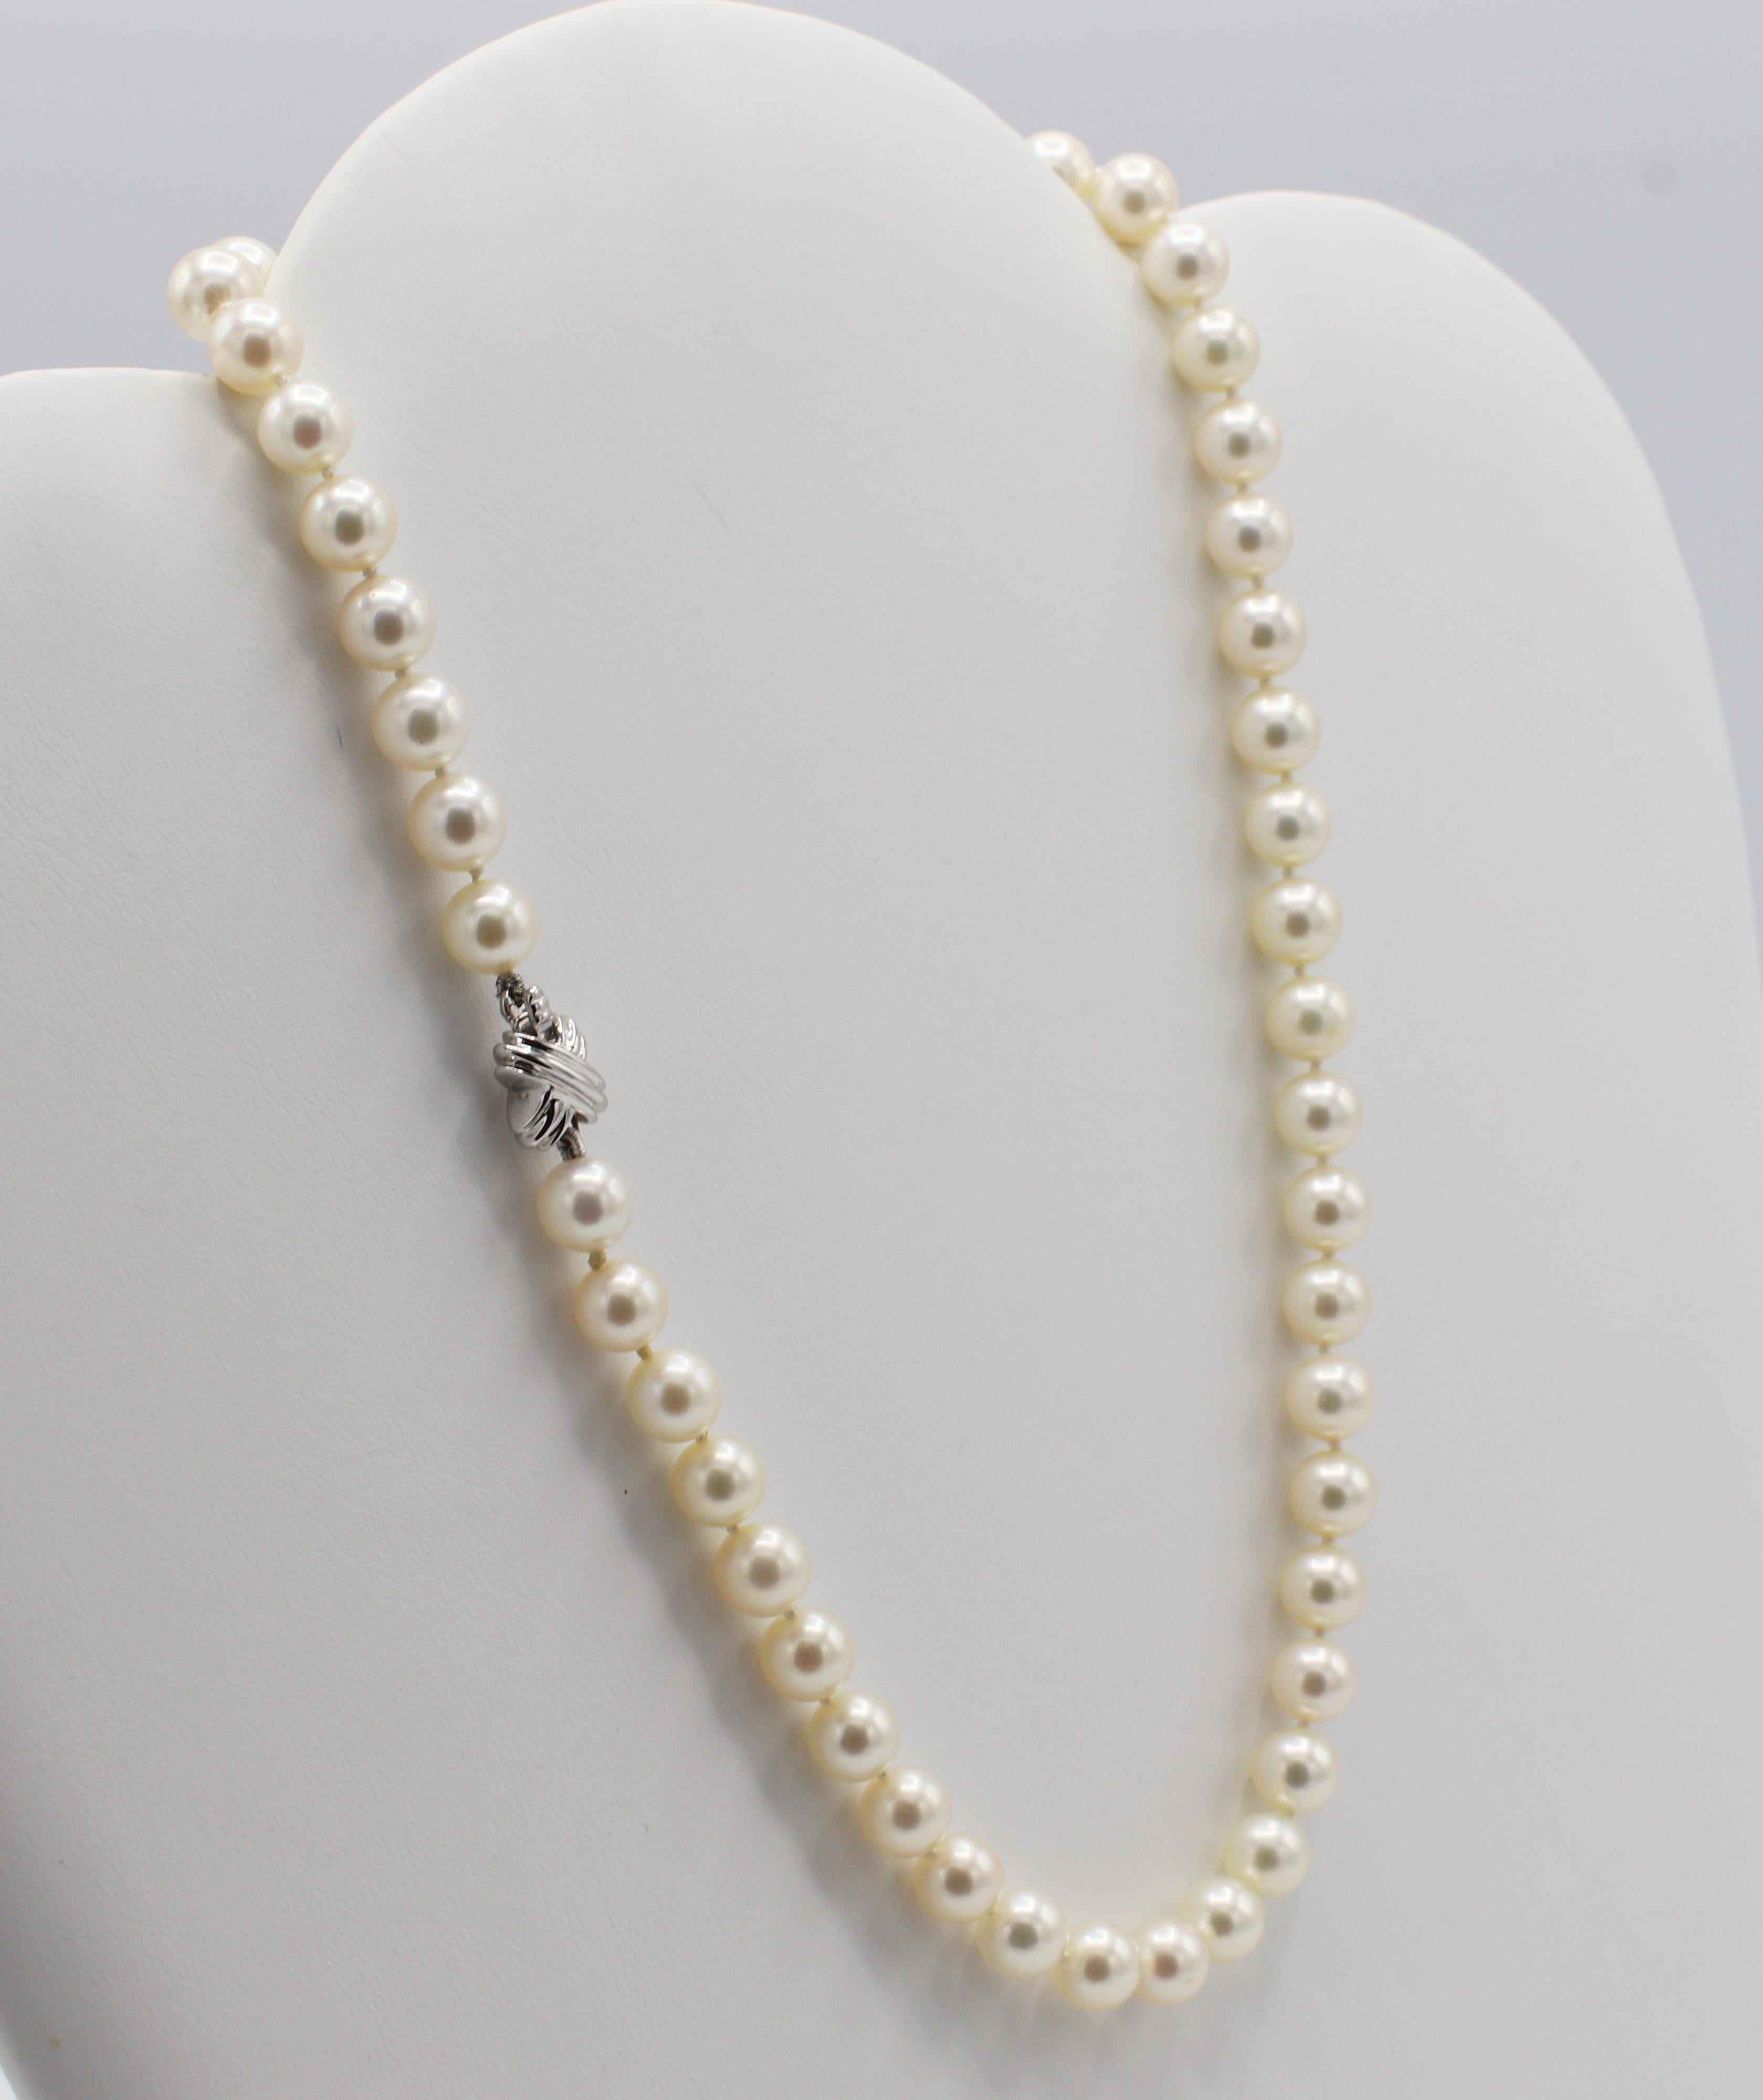 Tiffany & Co. 18 Karat White Gold Akoya Cultured Pearl 7mm Signature X Necklace 
Metal: 18k white gold clasp 
Weight: 30.5 grams
Length: 16 inches 
Pearls: Akoya cultured 7mm pearls
